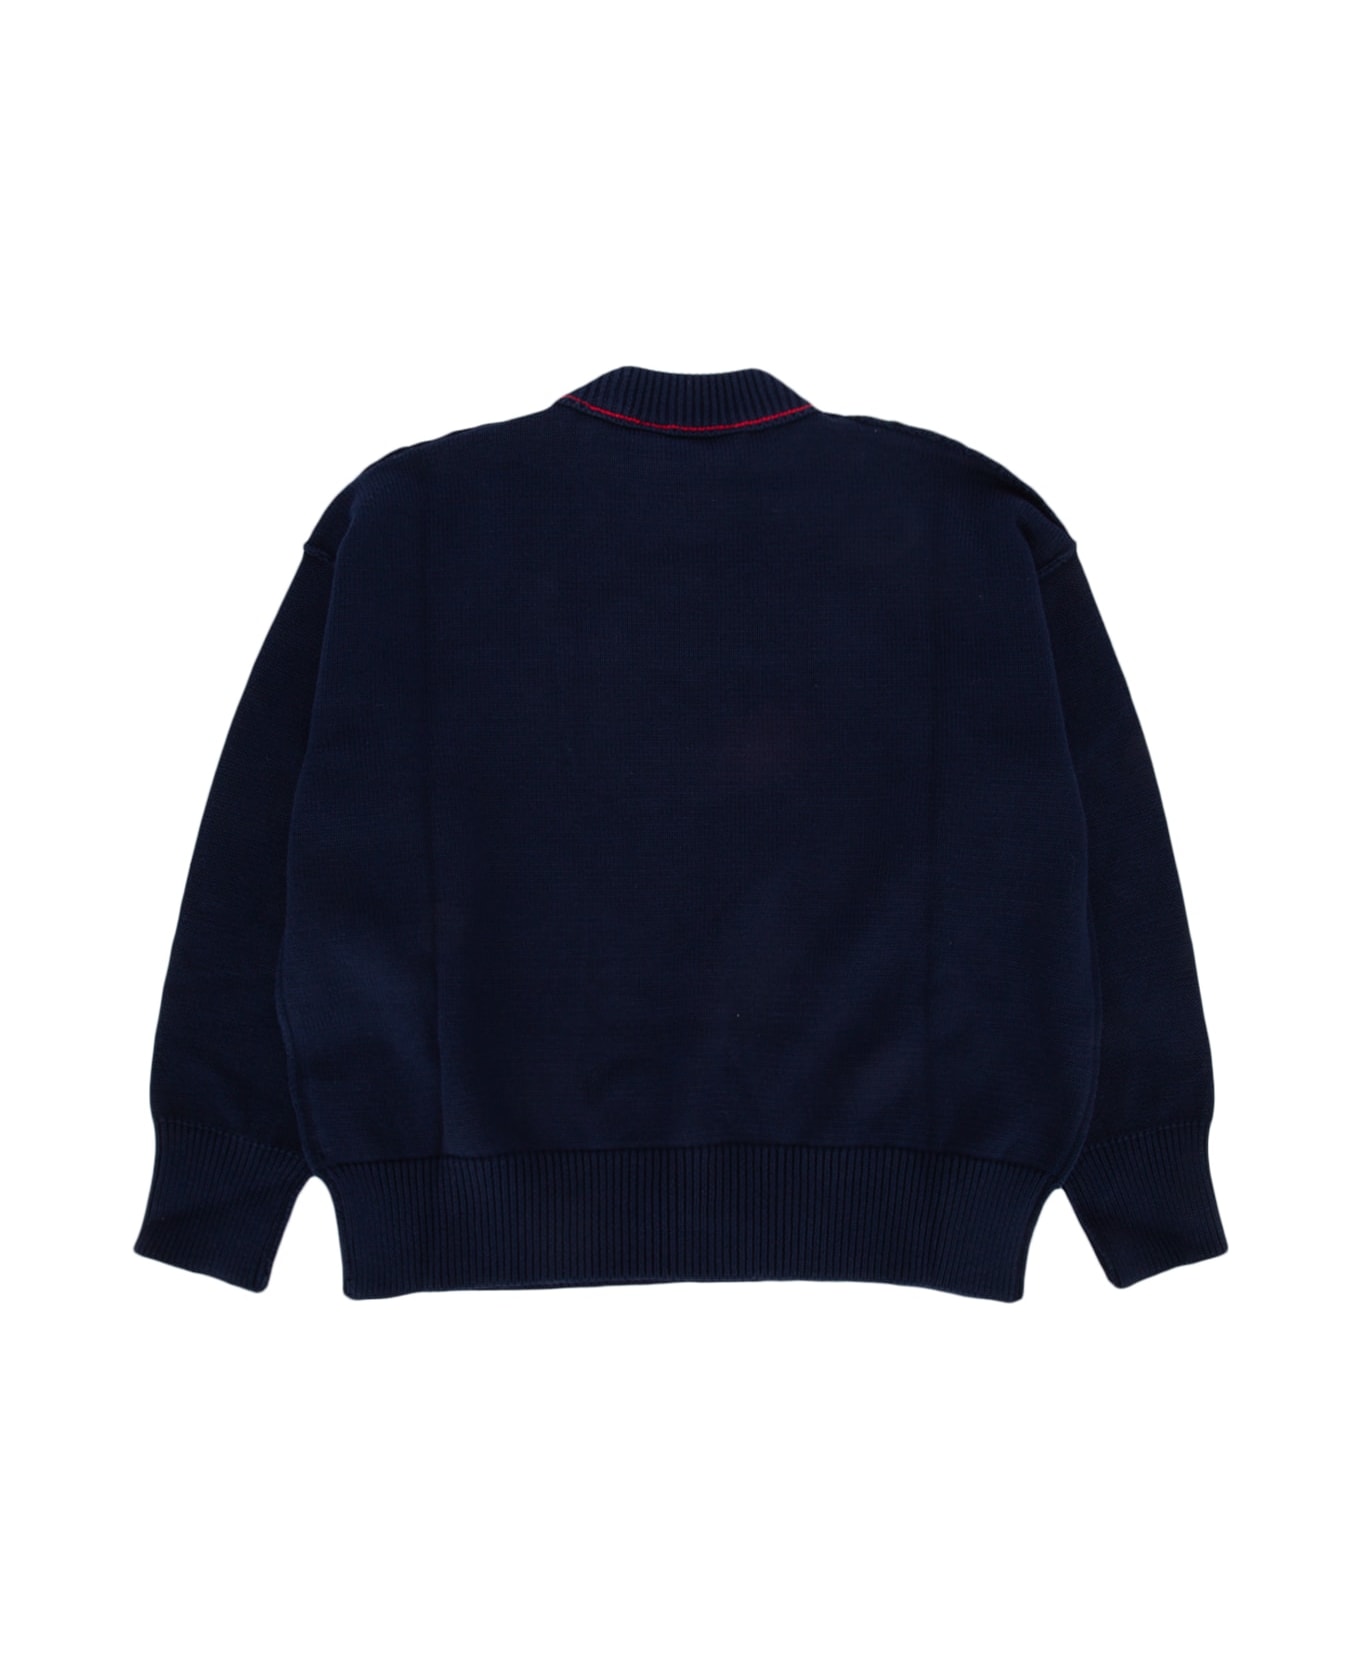 Palm Angels Maglieria - NAVYBLUERED